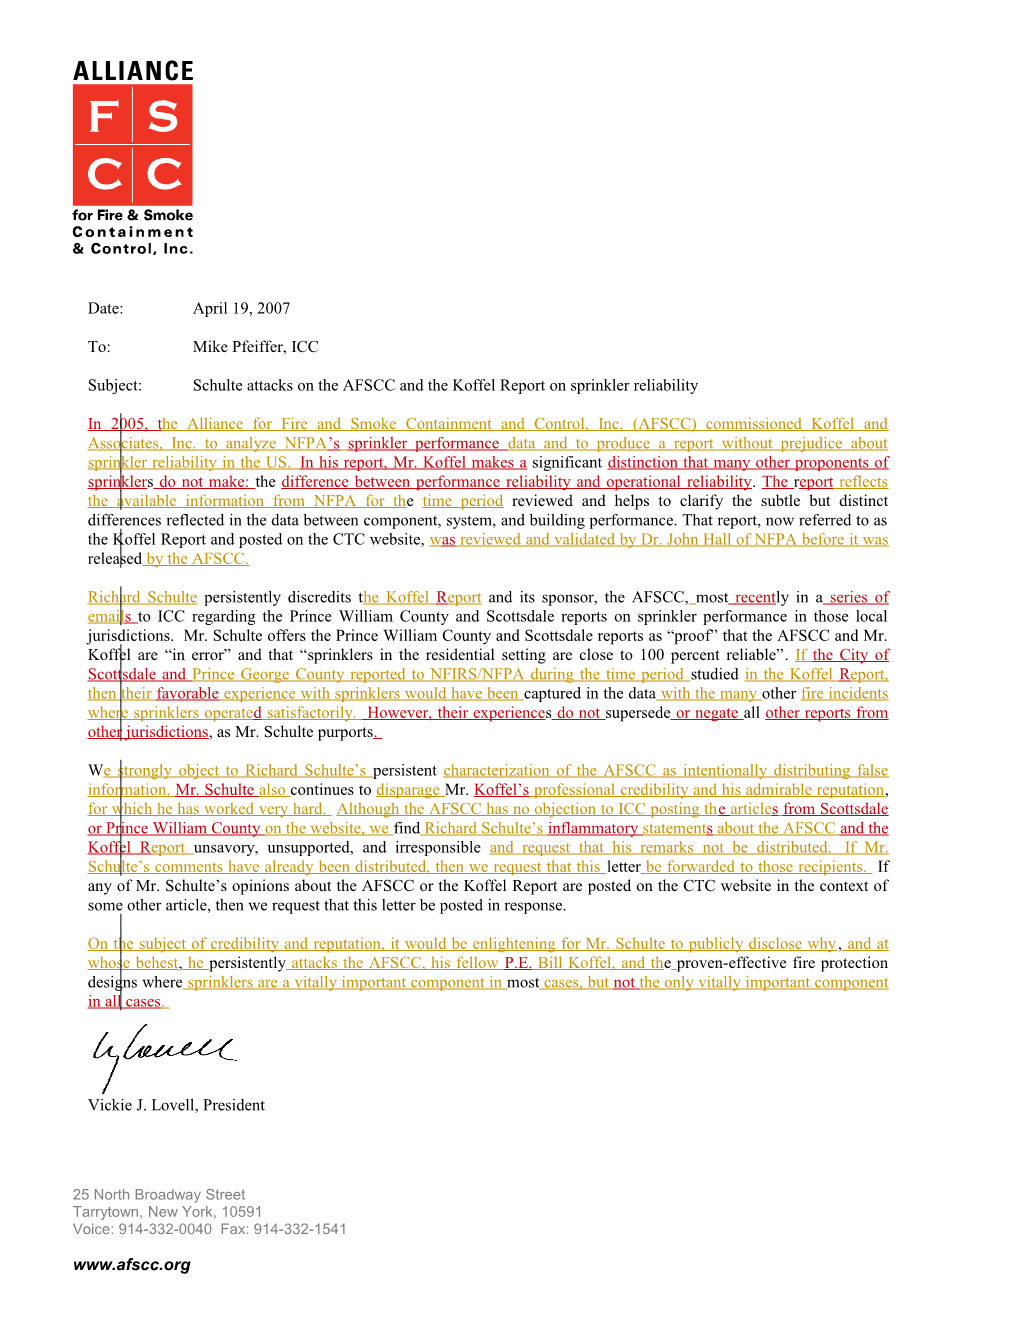 AFSCC Response to Schulte